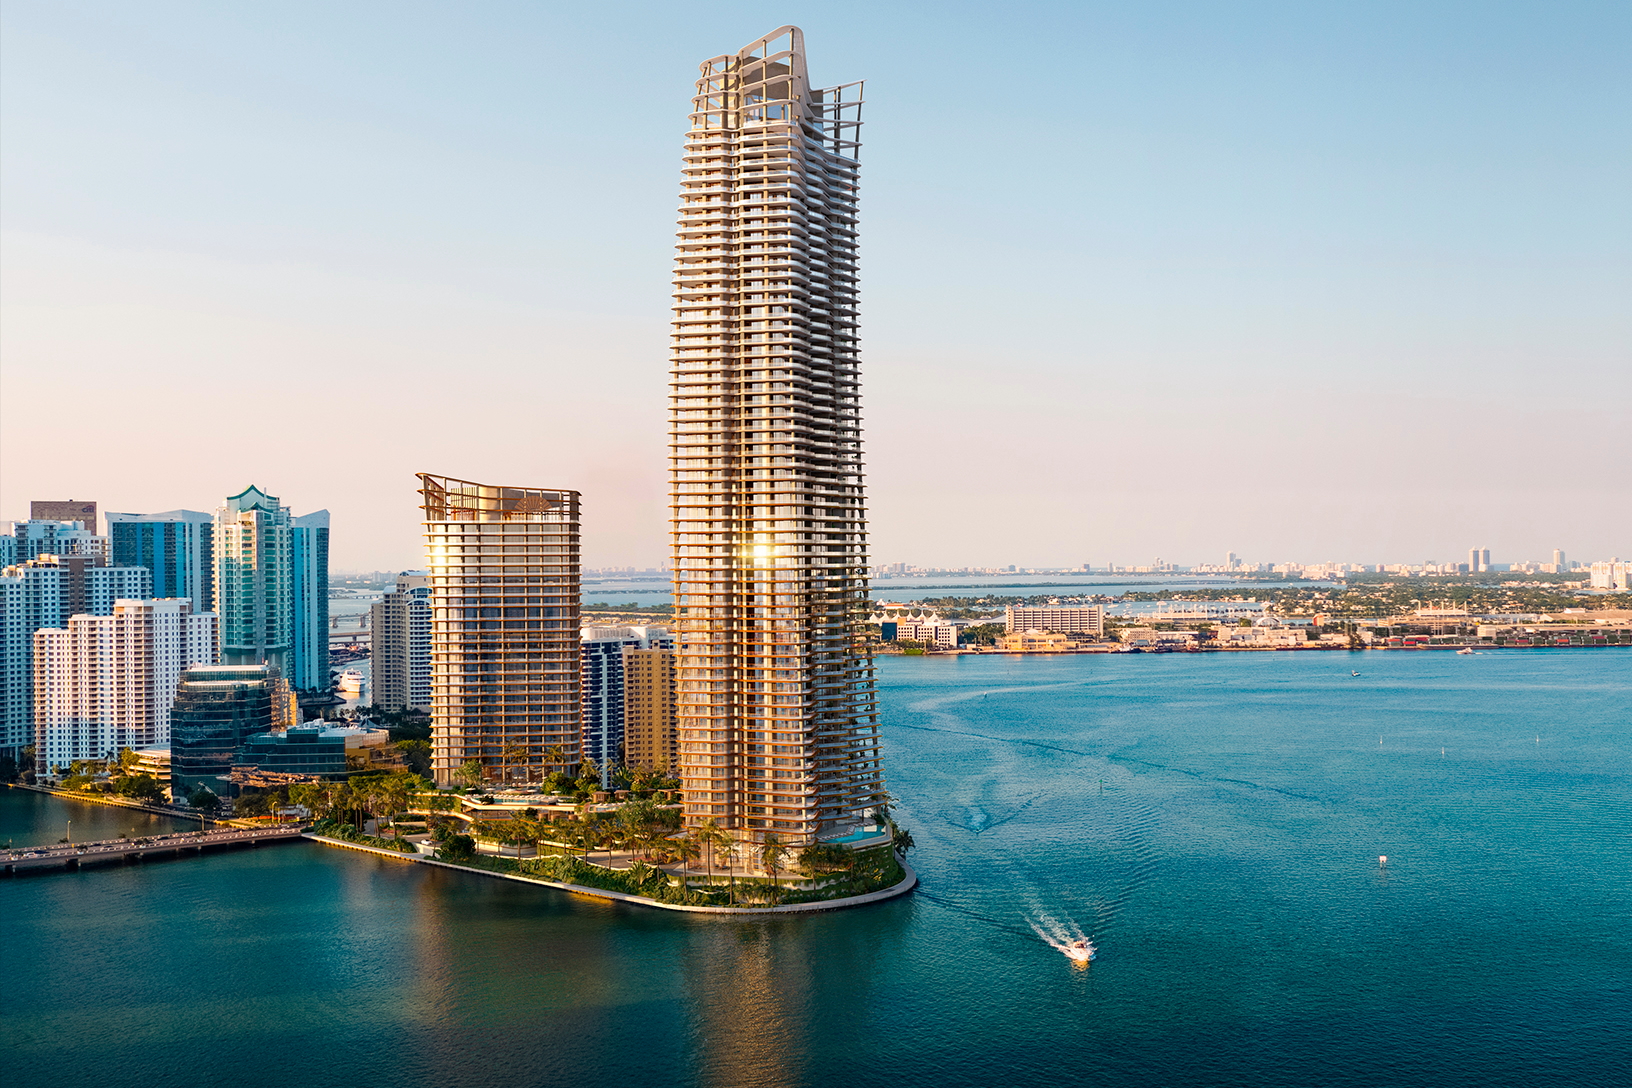 Mandarin Oriental has signed a new-build hotel and residences in Brickell Key, Miami, USA. Click to enlarge.